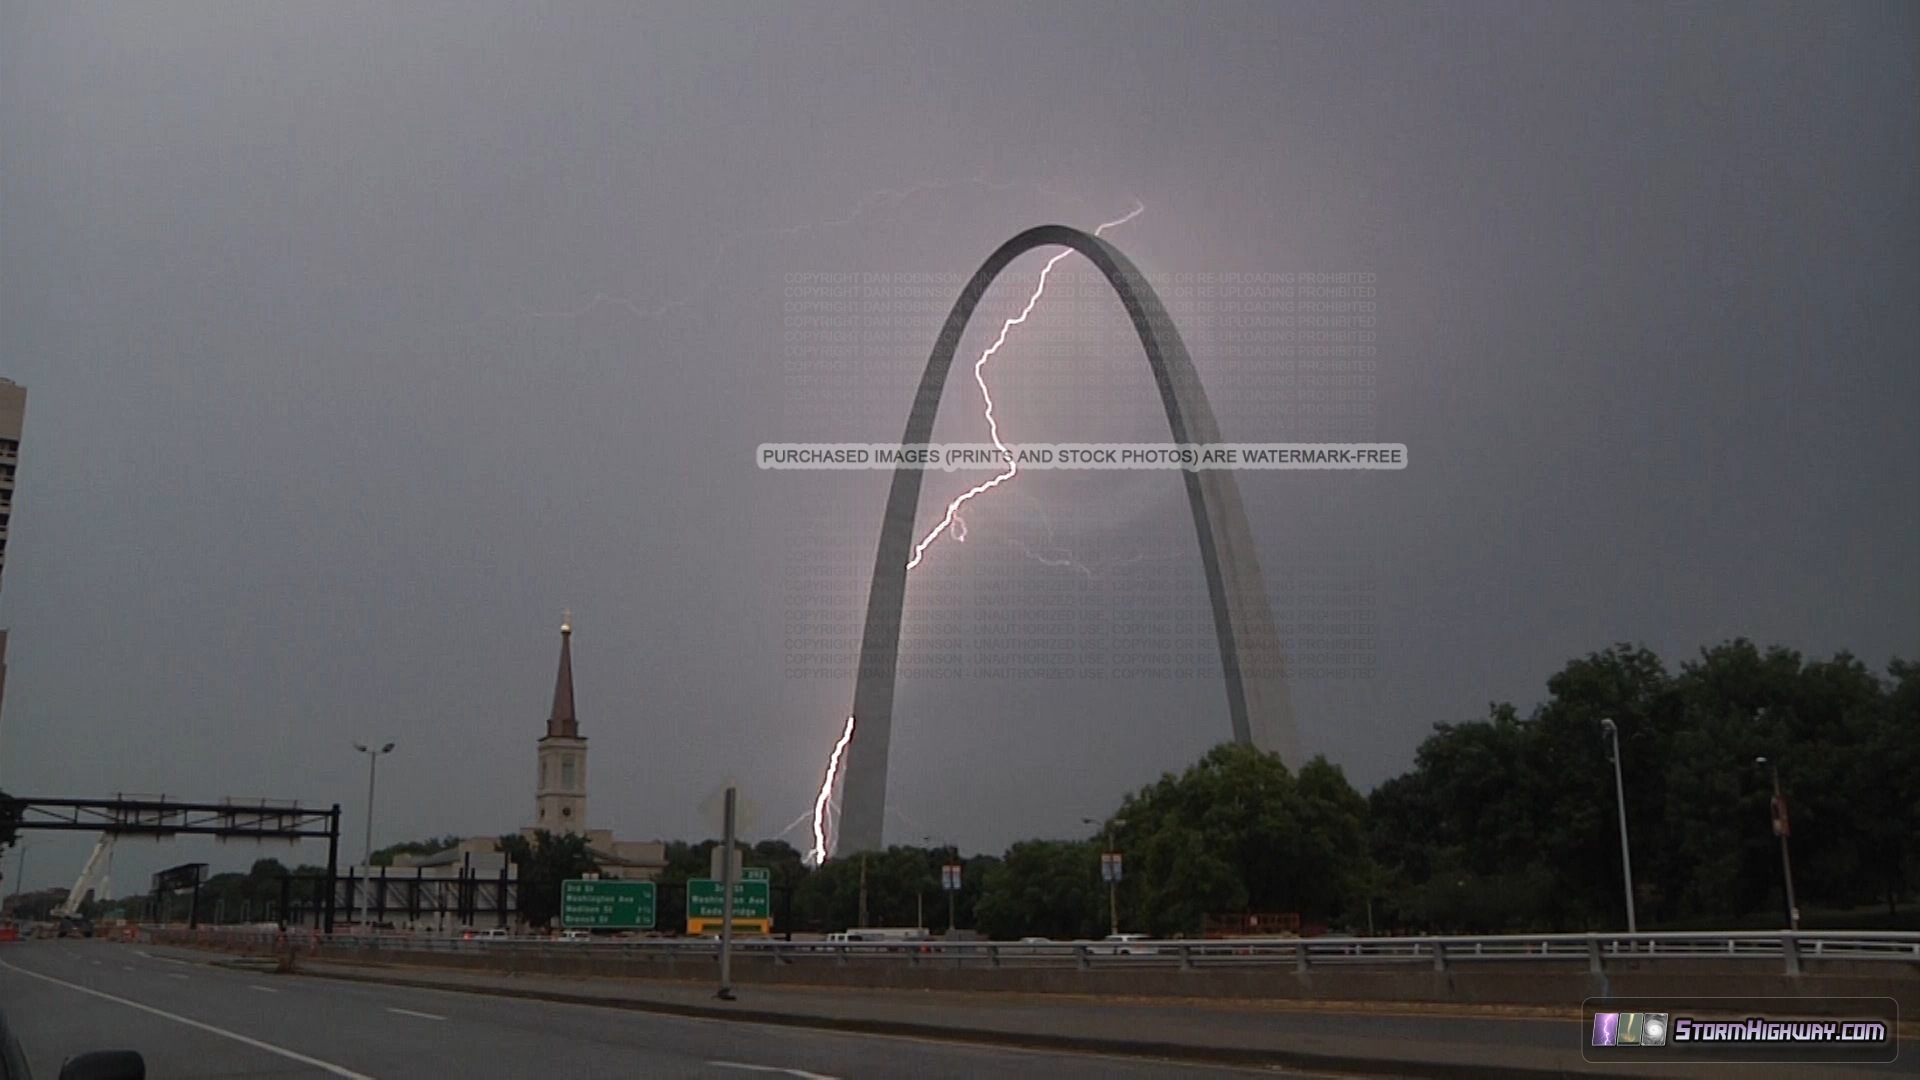 Lightning behind the Gateway Arch in St. Louis, August 27, 2014